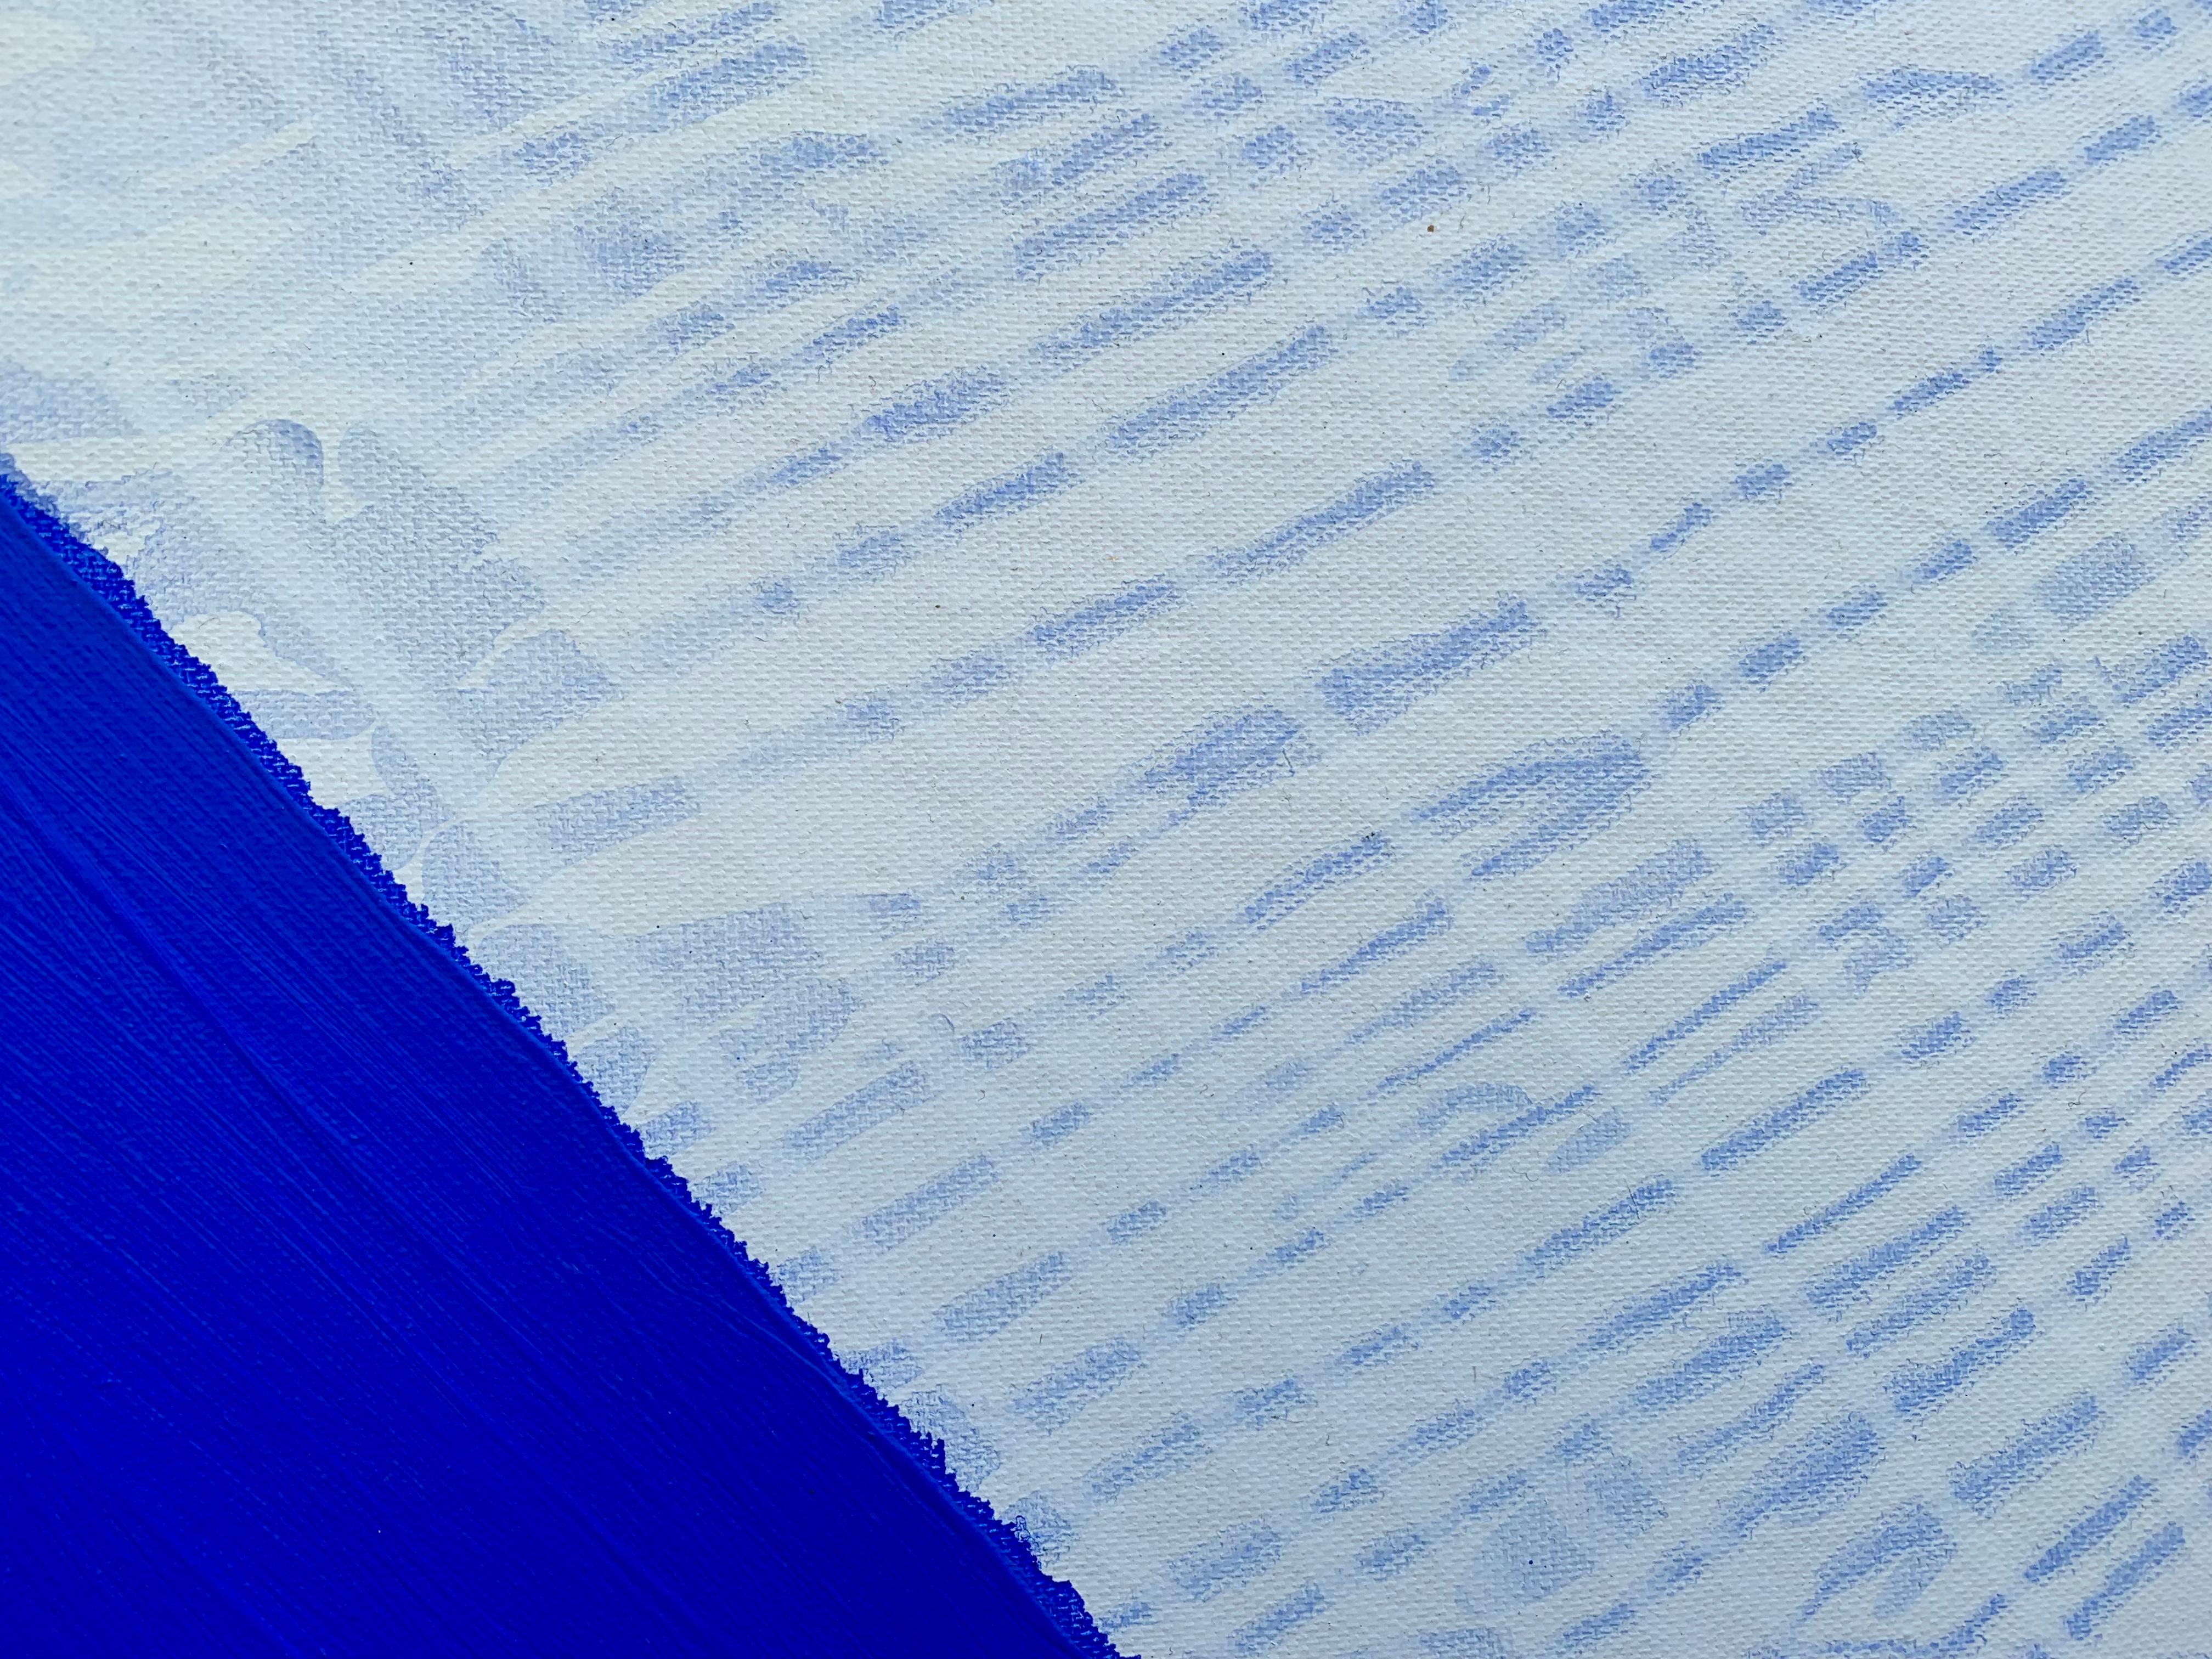 Bluemetrie - Contemporary Blue, White, Abstract Oil Painting, Conceptual Art For Sale 2